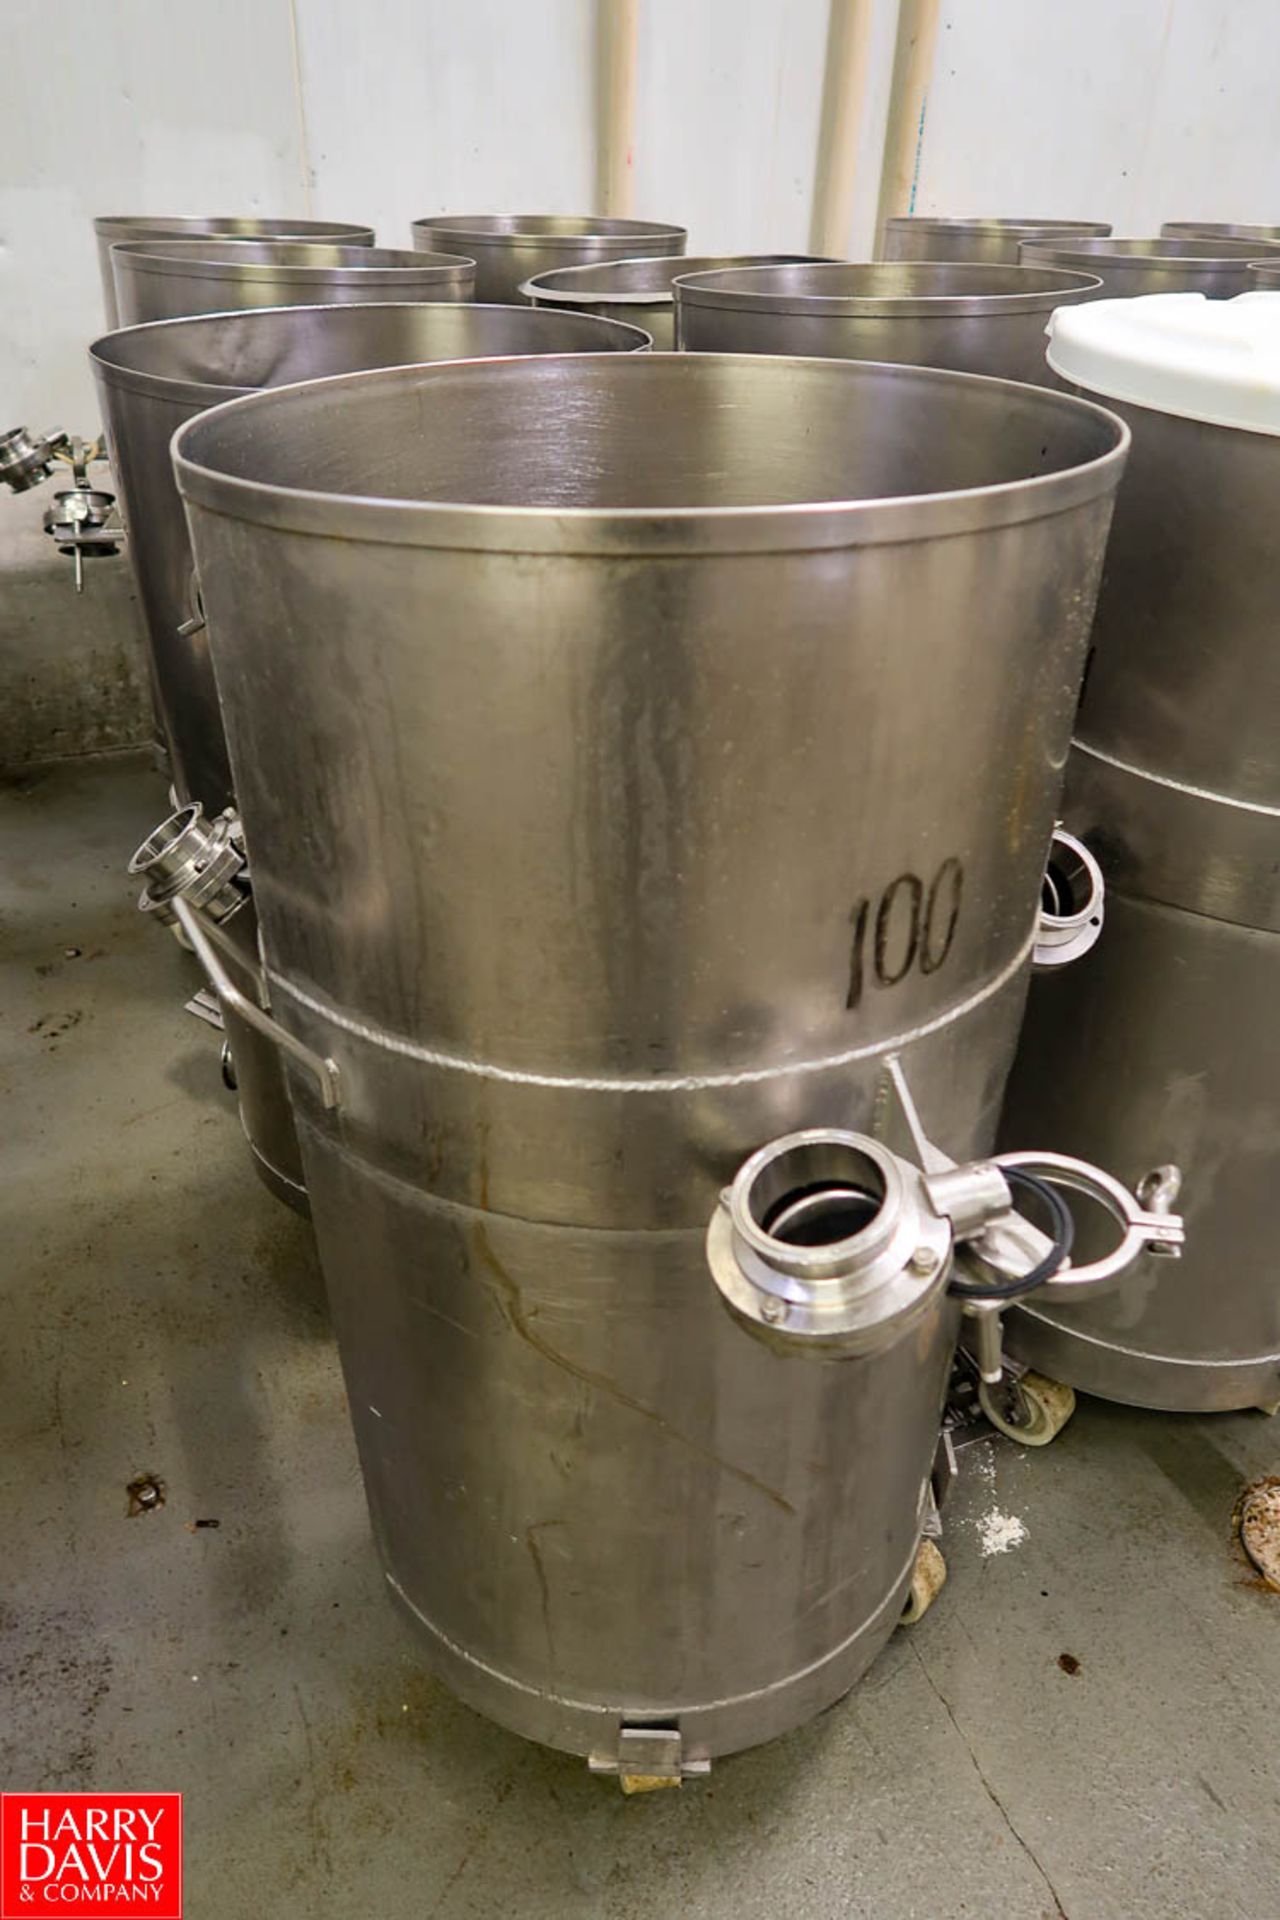 S/S Drums Approx. 50 Gallon/190 Liter Capacity, 3" Diameter Outlets, with Manual Butterfly Valves. - Image 2 of 3